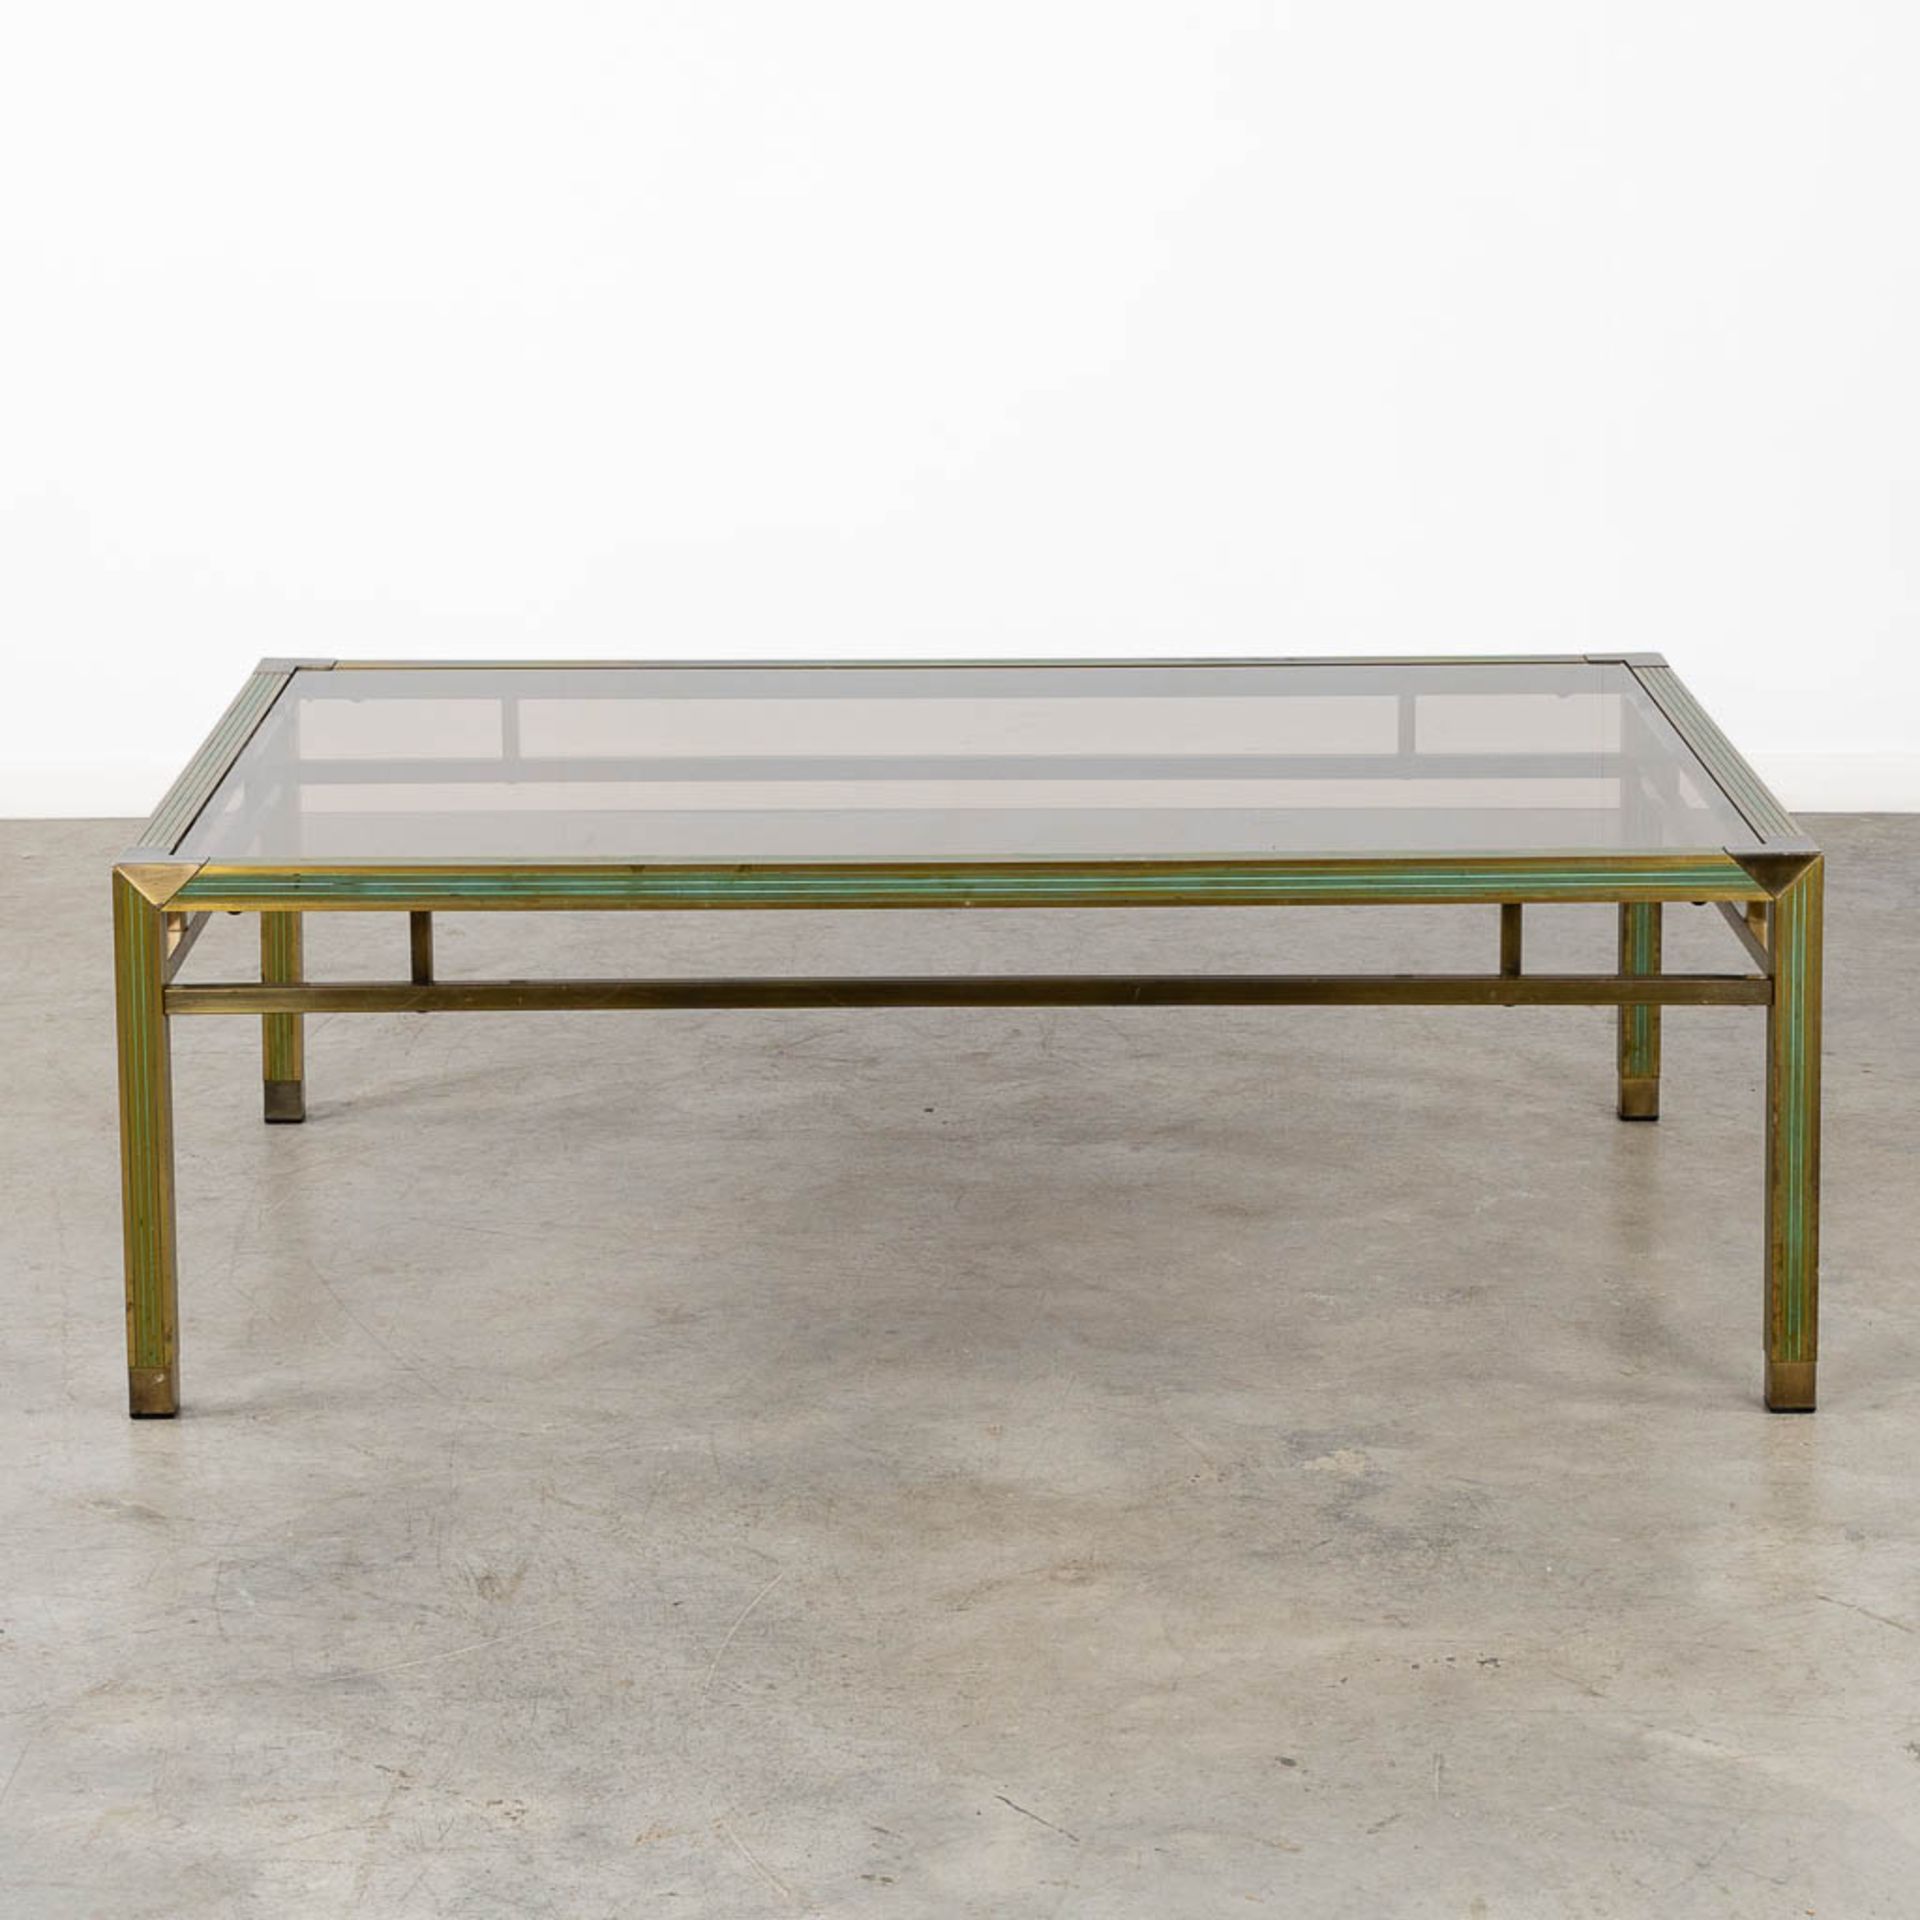 A mid-century coffee table, brass and glass in the style of Belgo Chrome. (L:88 x W:128 x H:43 cm) - Bild 3 aus 9